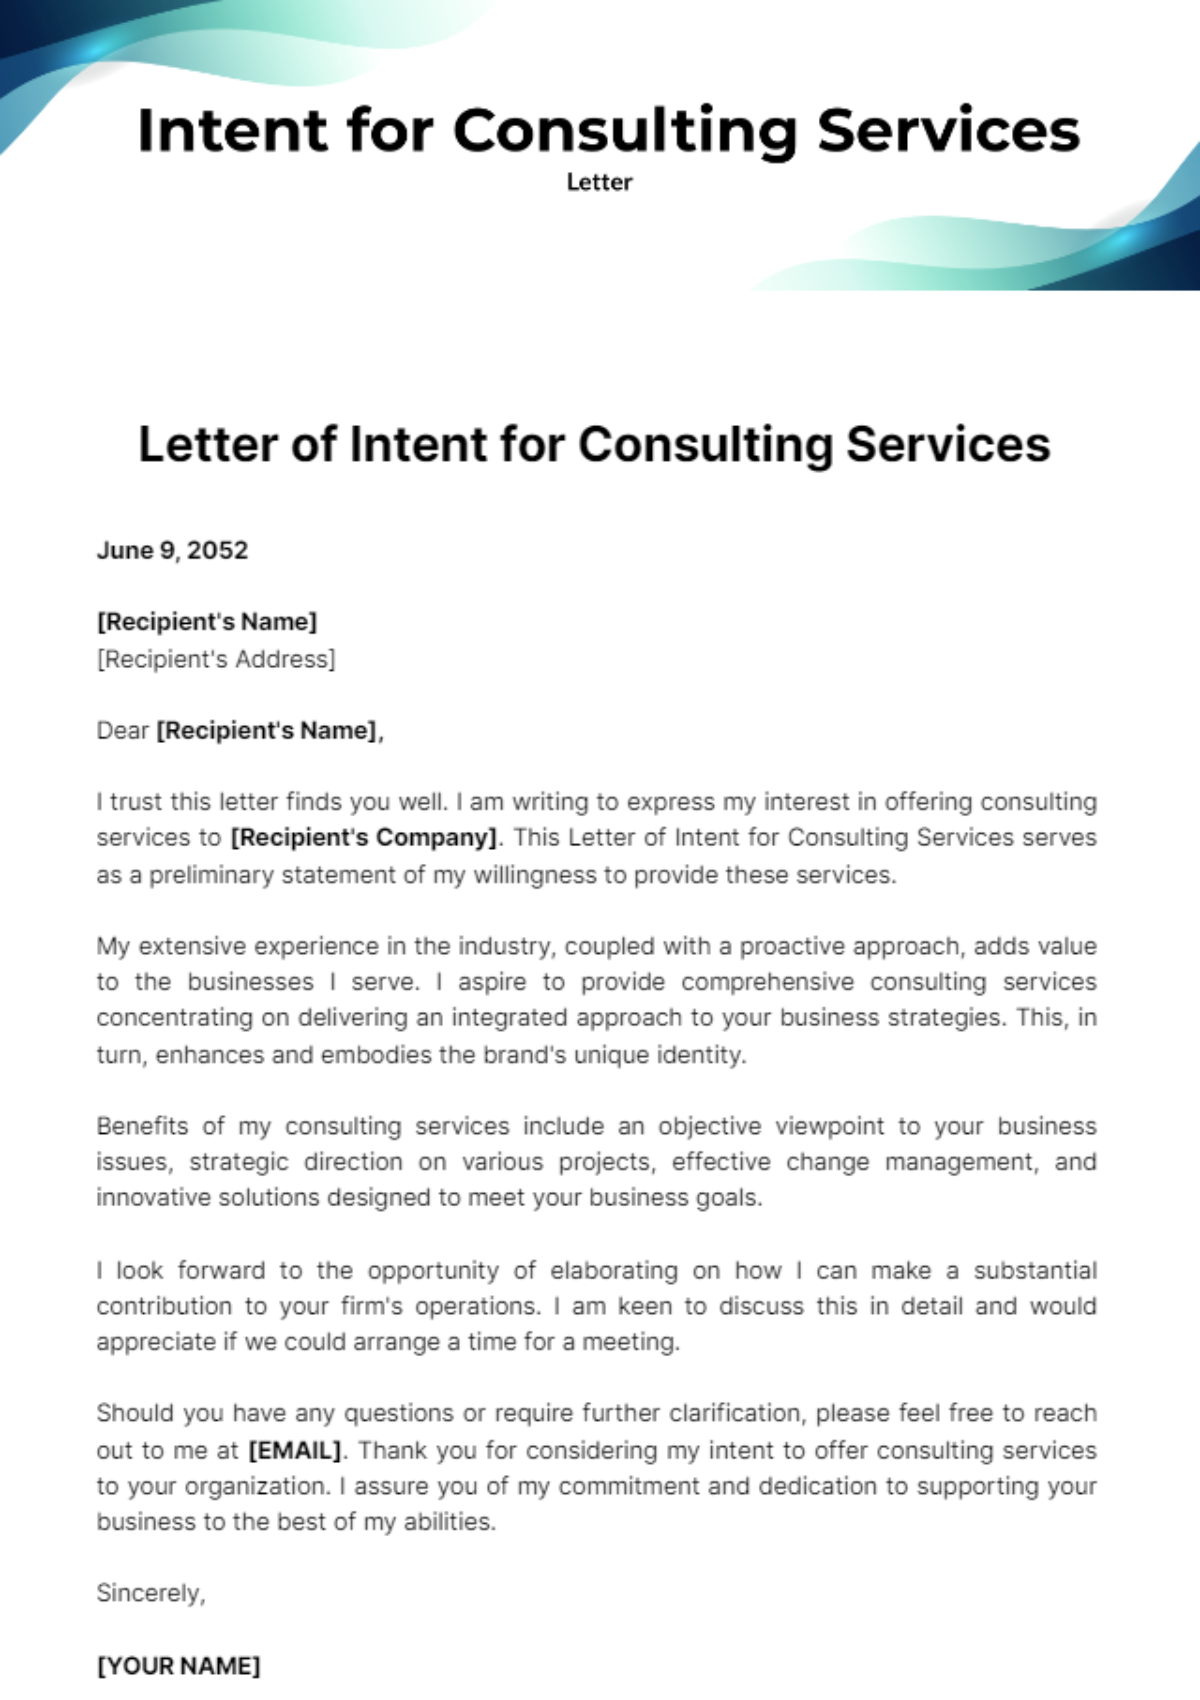 Free Letter of Intent for Consulting Services Template